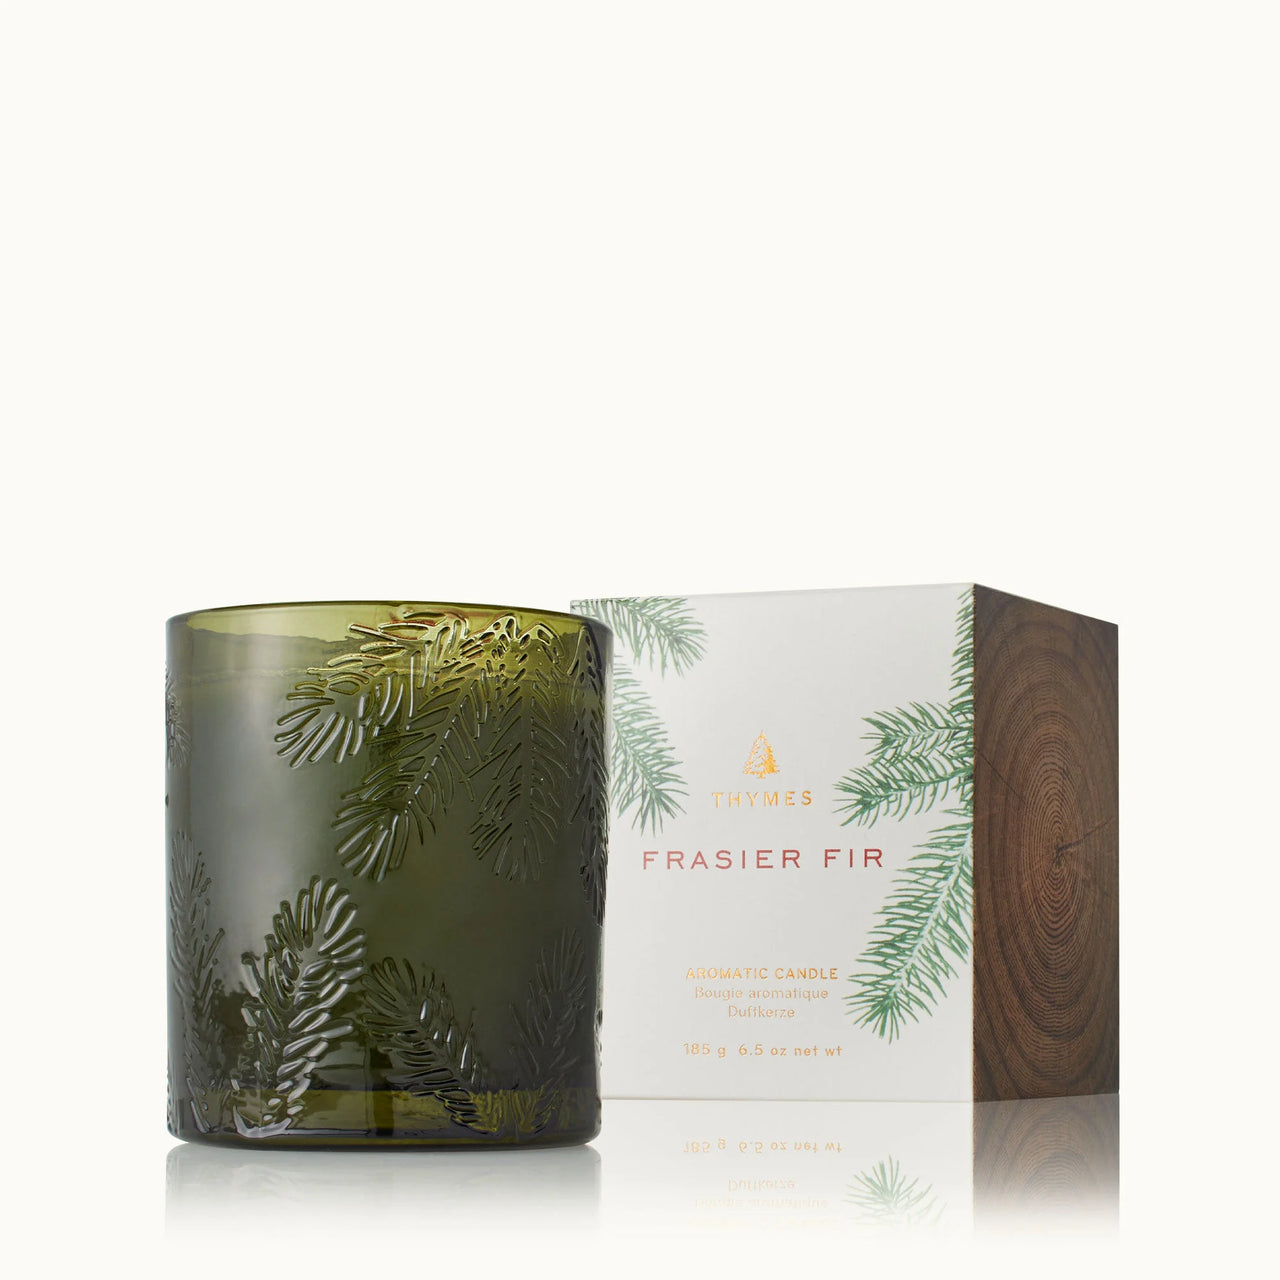 Frasier Fir Poured Candle - Molded Green Glass